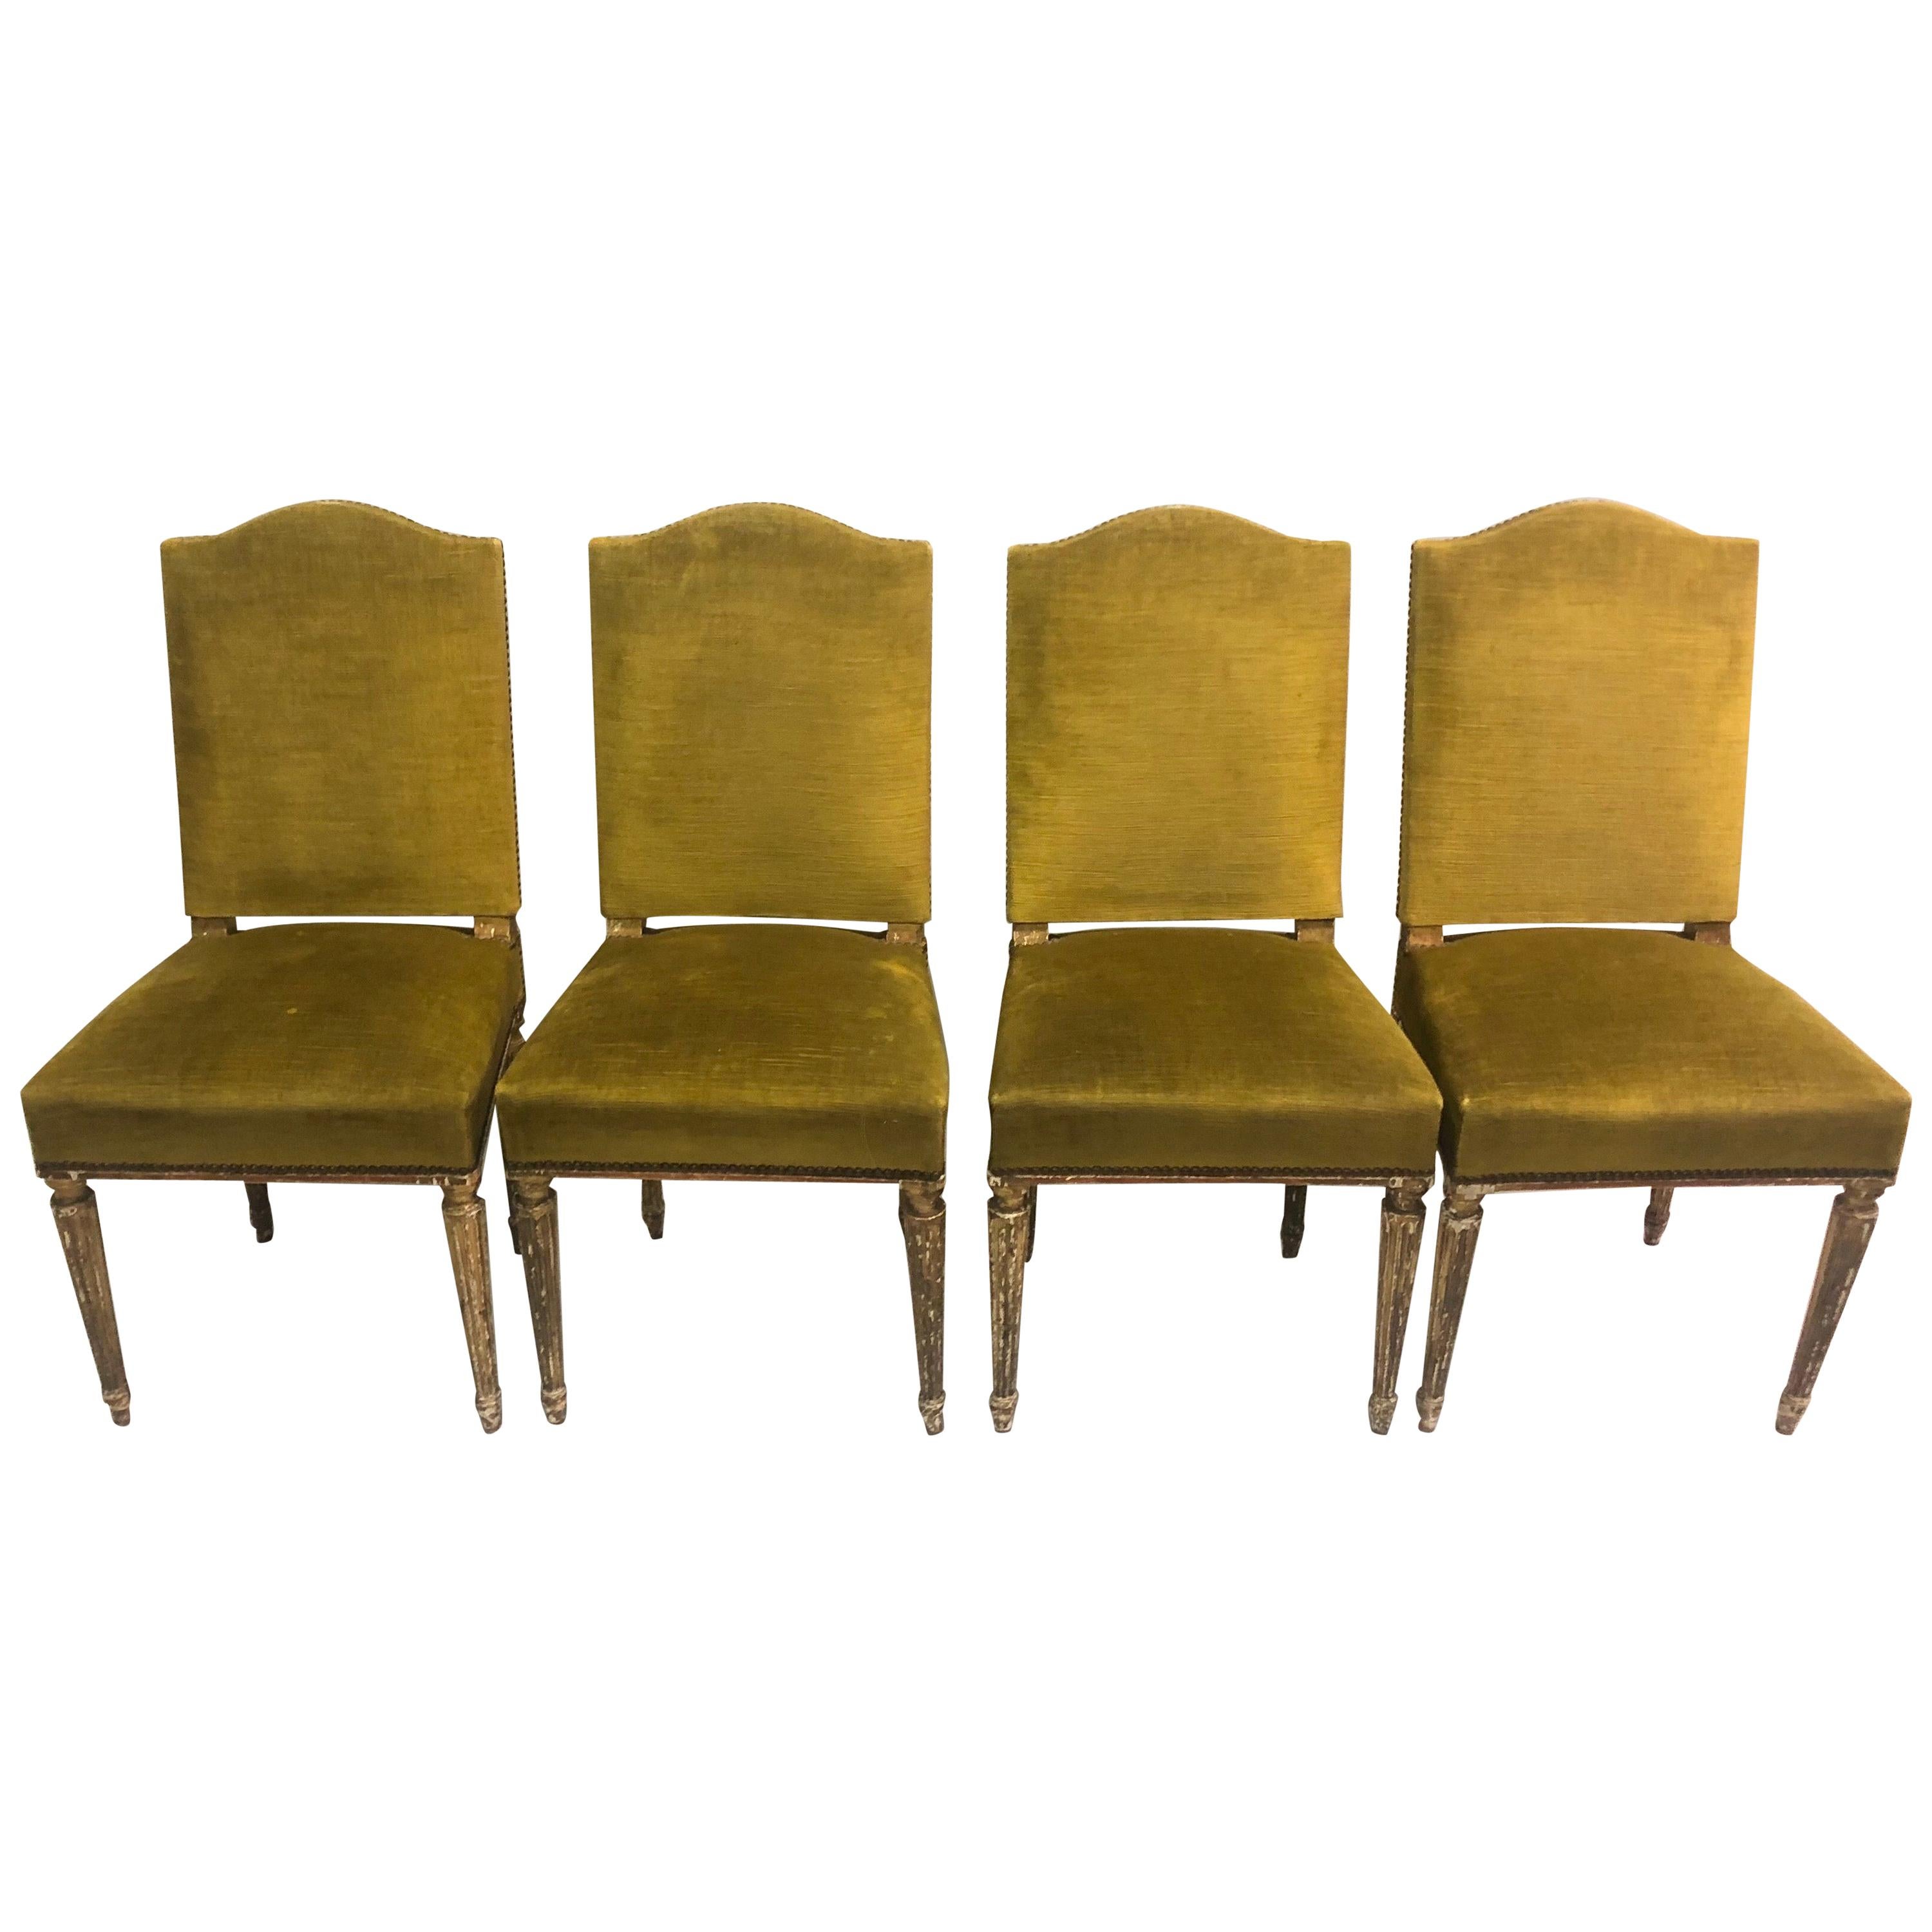 4 French Modern Neoclassical Dining Chairs Attributed to Maison Jansen, 1940